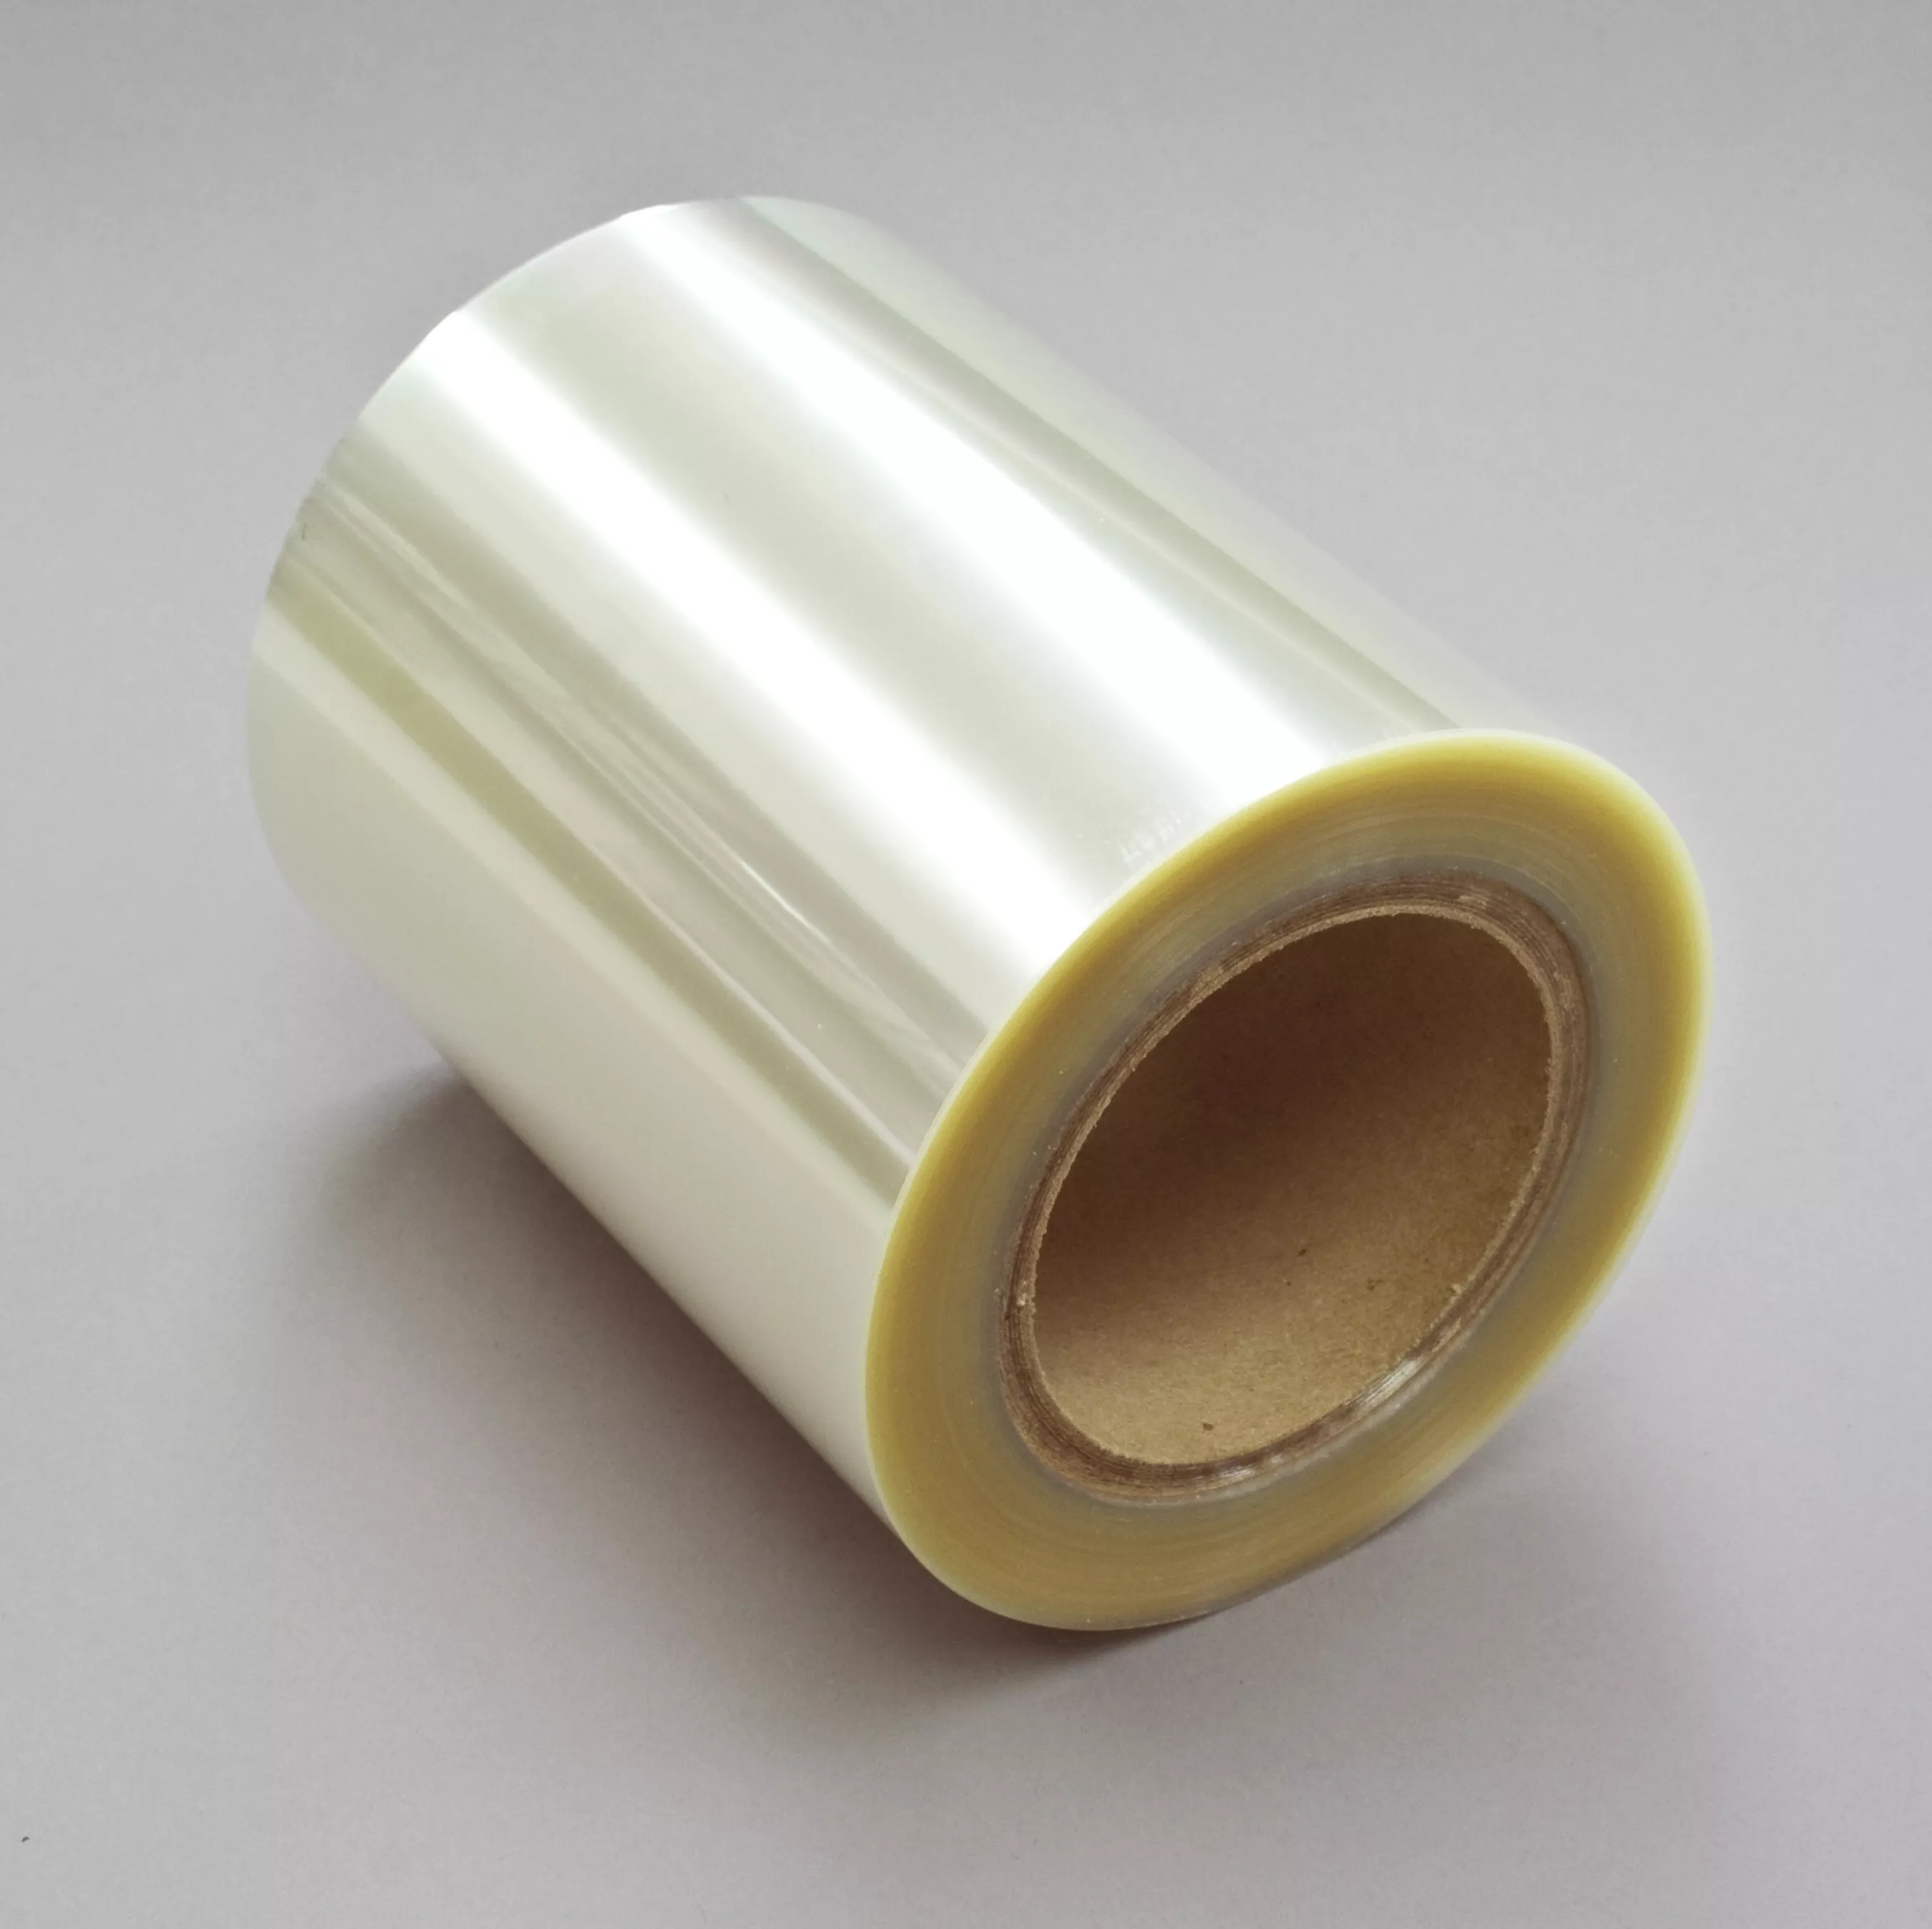 3M™ Overlaminate Label Material 7733FL, Clear UV Resistant Polyester, 6
in x 1668 ft, 1 Roll/Case